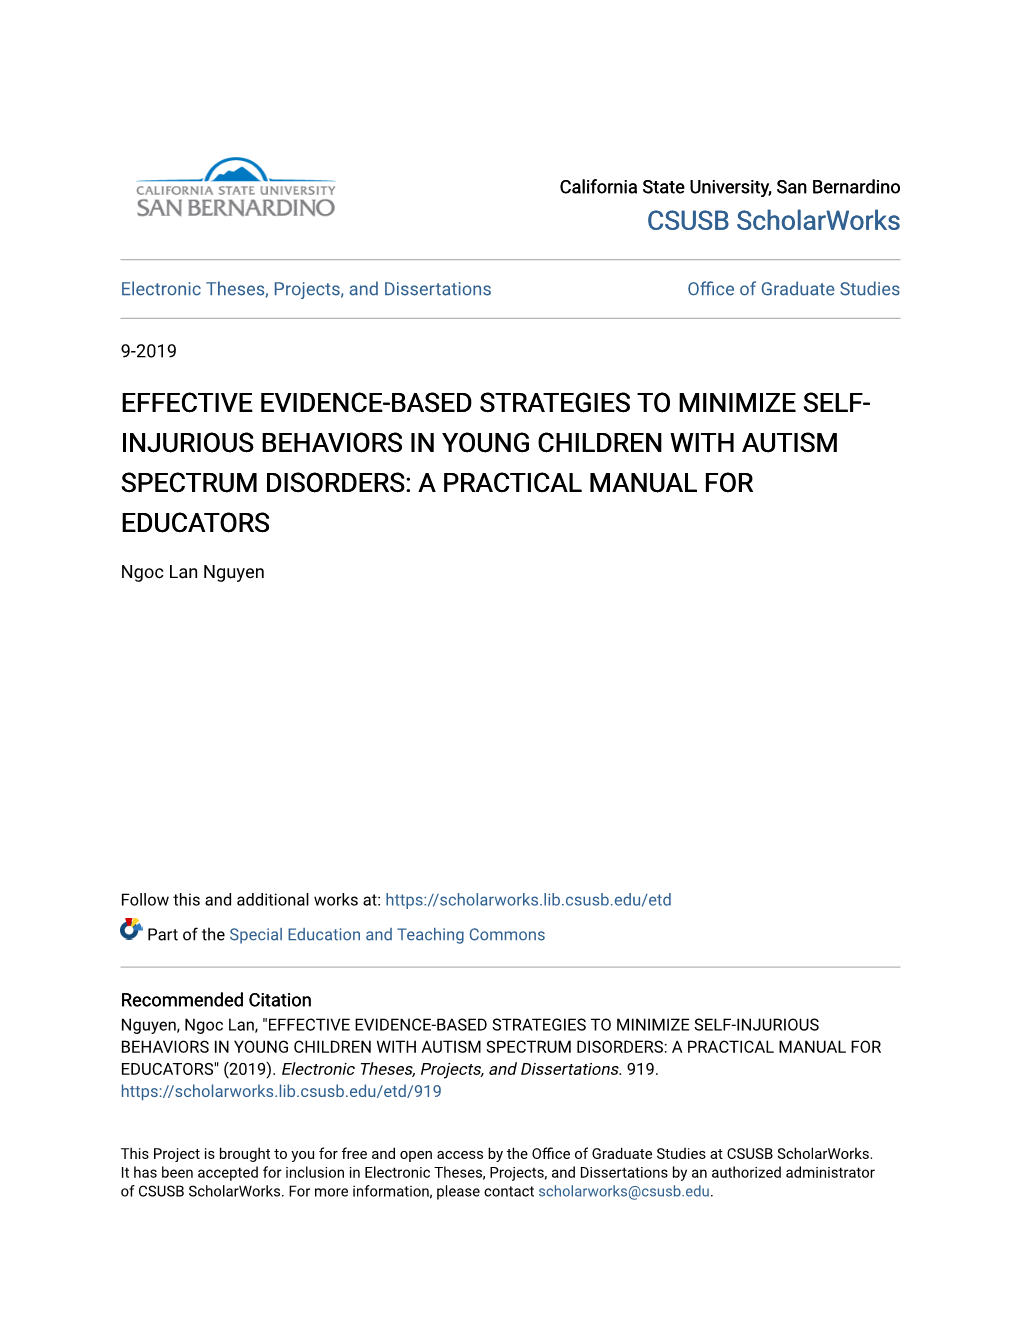 Effective Evidence-Based Strategies to Minimize Self-Injurious Behaviors in Young Children with Autism Spectrum Disorders: a Practical Manual for Educators" (2019)